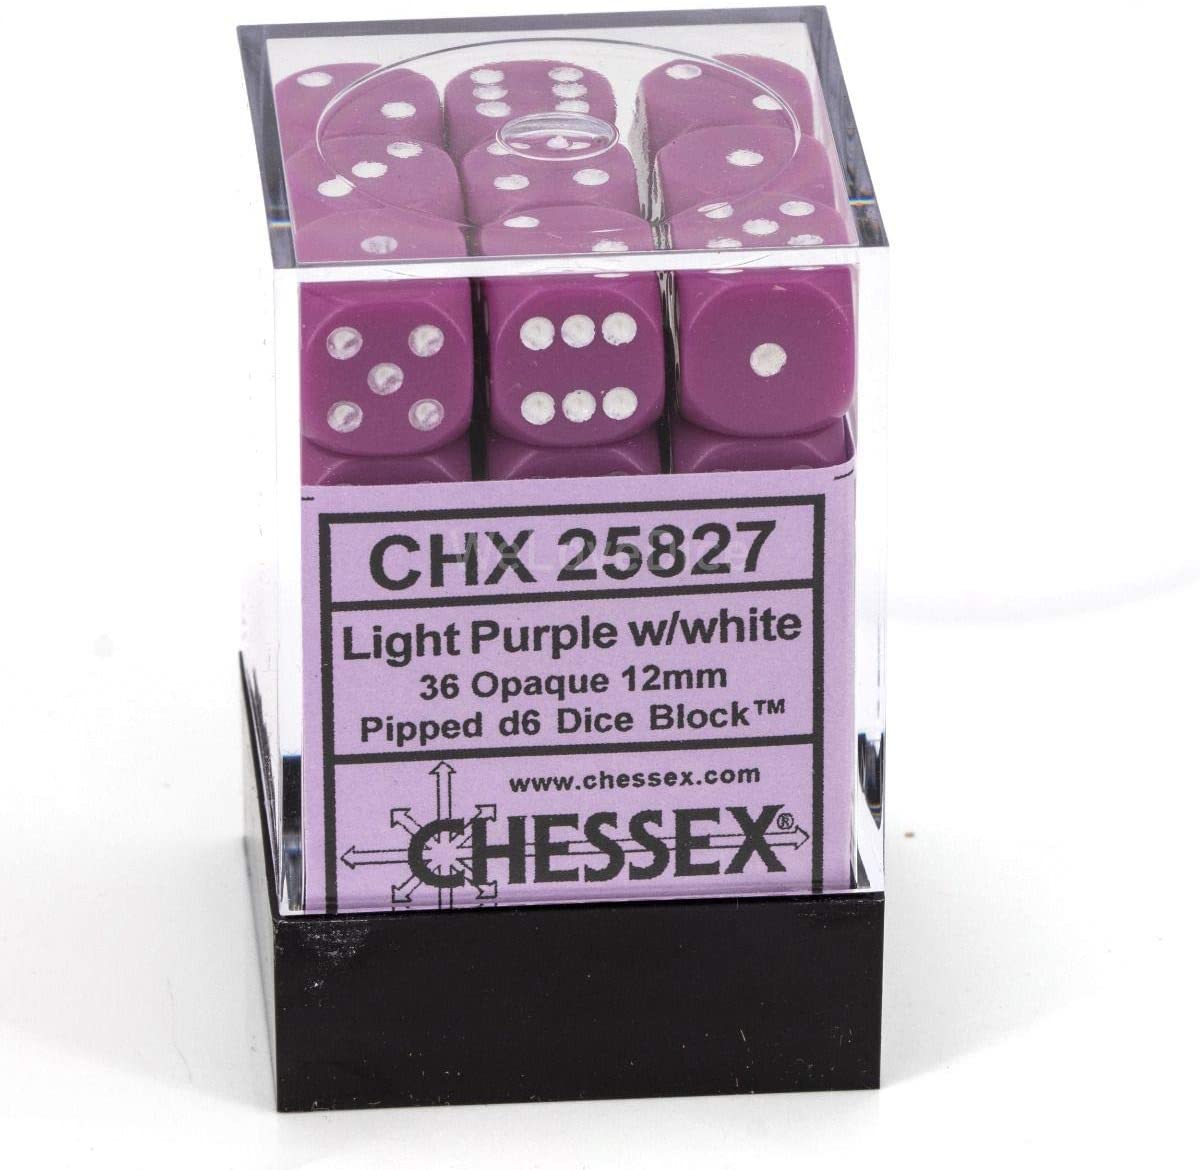 Chessex Dice: D6 Block 12mm - Opaque - Light Purple with White (CHX 25827) - Gamescape